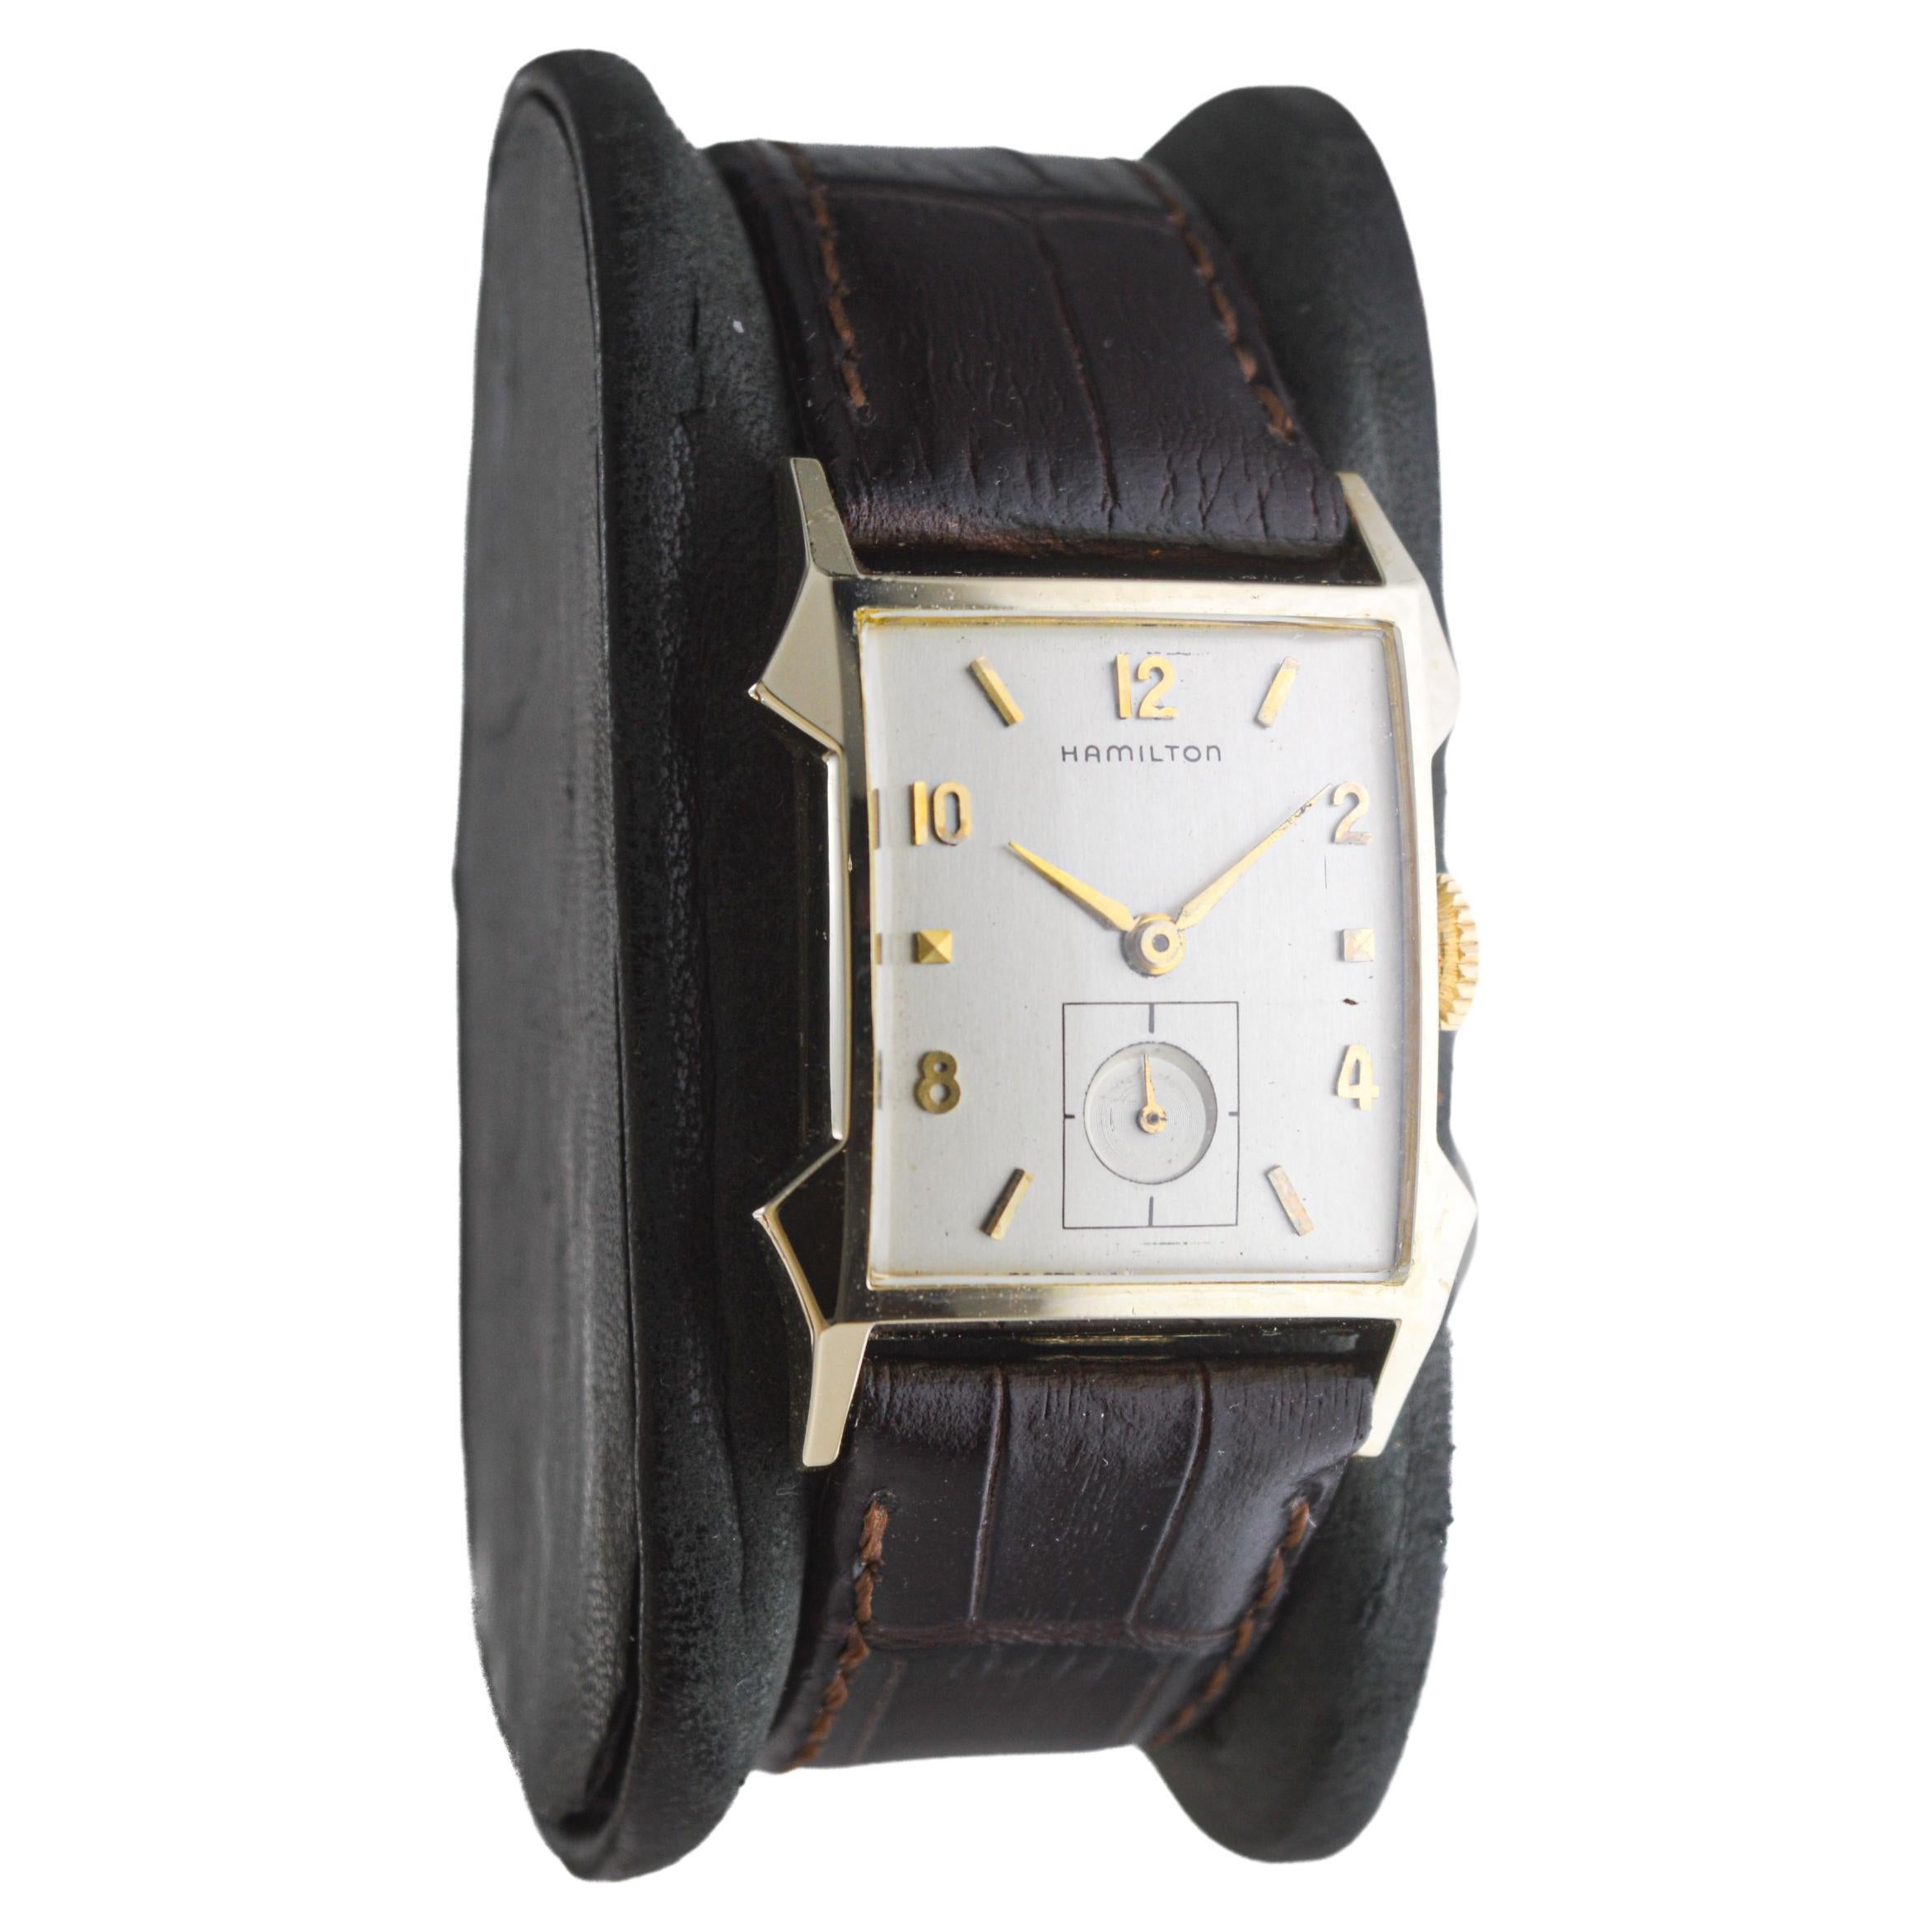 FACTORY / HOUSE: Hamilton Watch Company
STYLE / REFERENCE: Morton / Art Deco Tank Style 
METAL / MATERIAL: Yellow Gold Filled
CIRCA / YEAR: 1950's
DIMENSIONS / SIZE: Length 27mm X Width 36mm
MOVEMENT / CALIBER: Manual Winding / 22 Jewels / Caliber